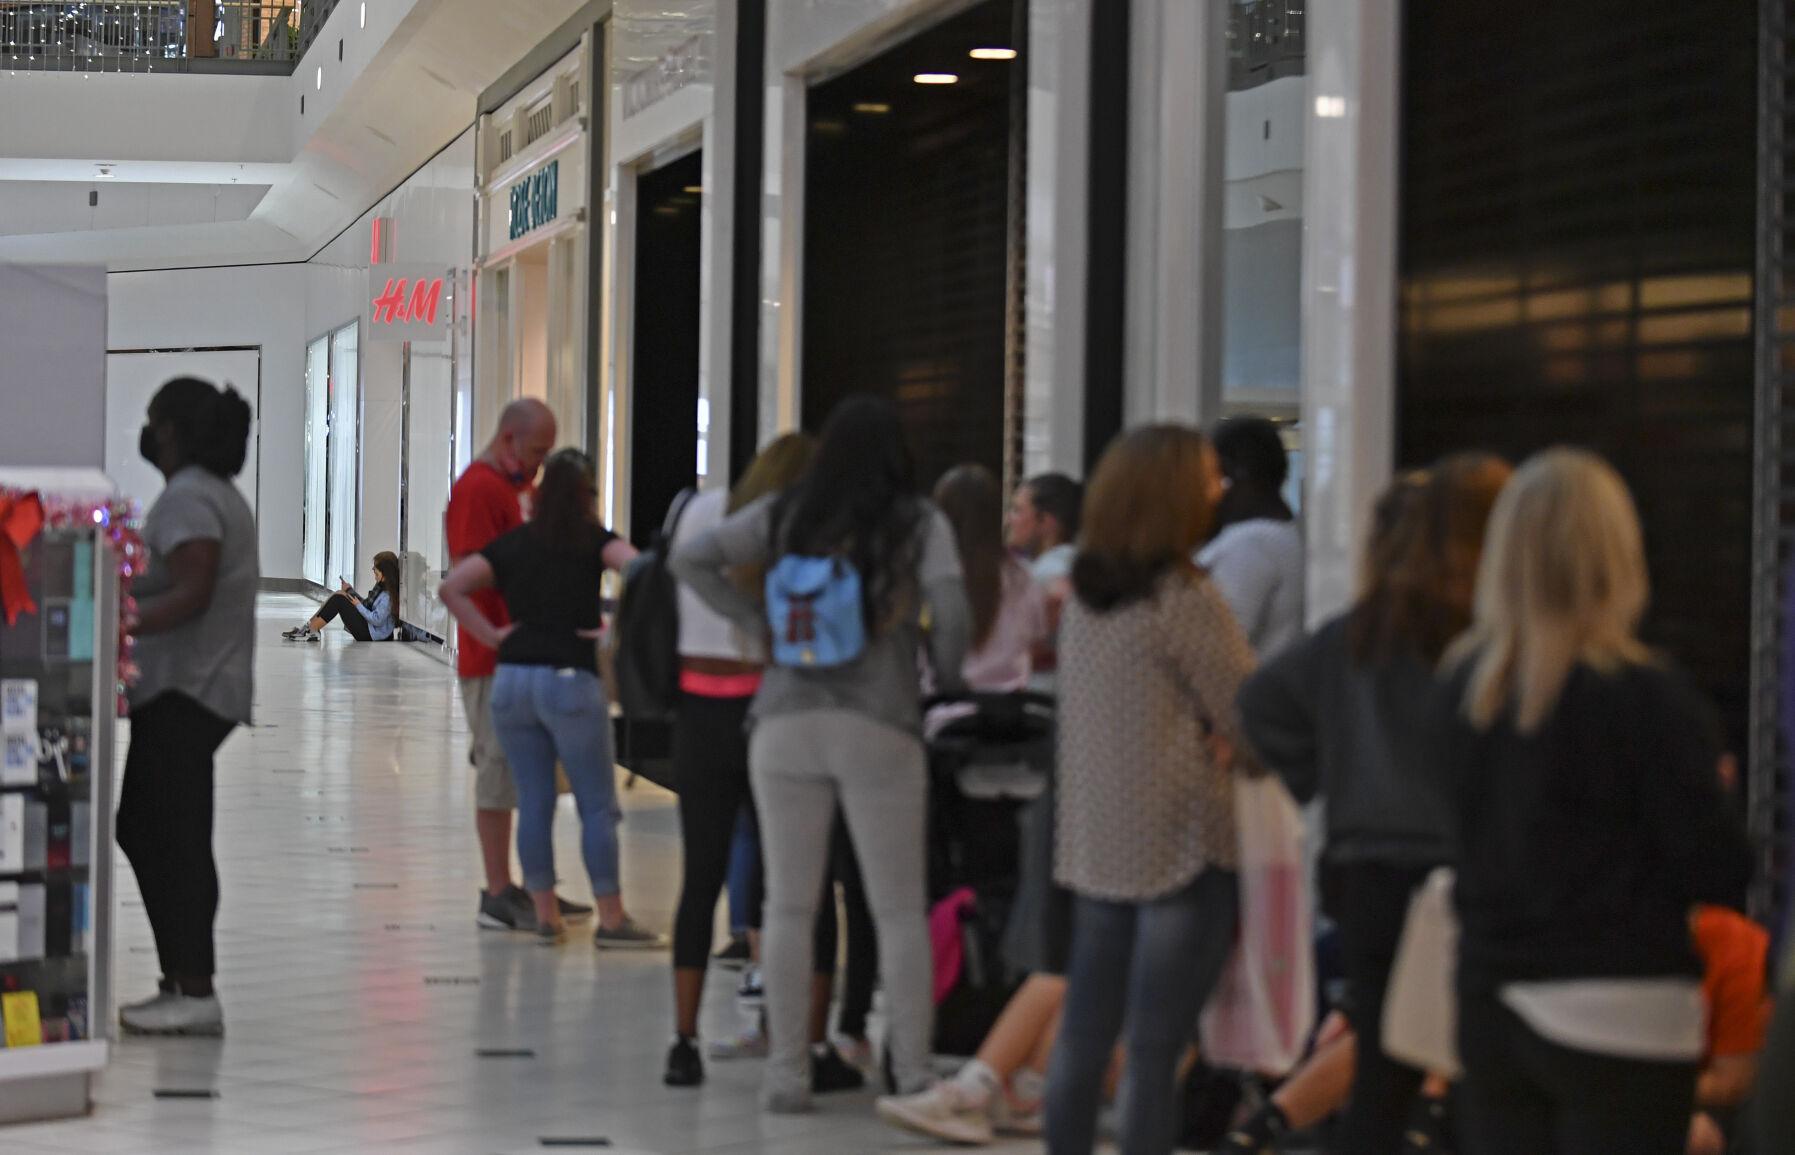 Photos: Shoppers line up at Baton Rouge retailers for Black Friday 2020